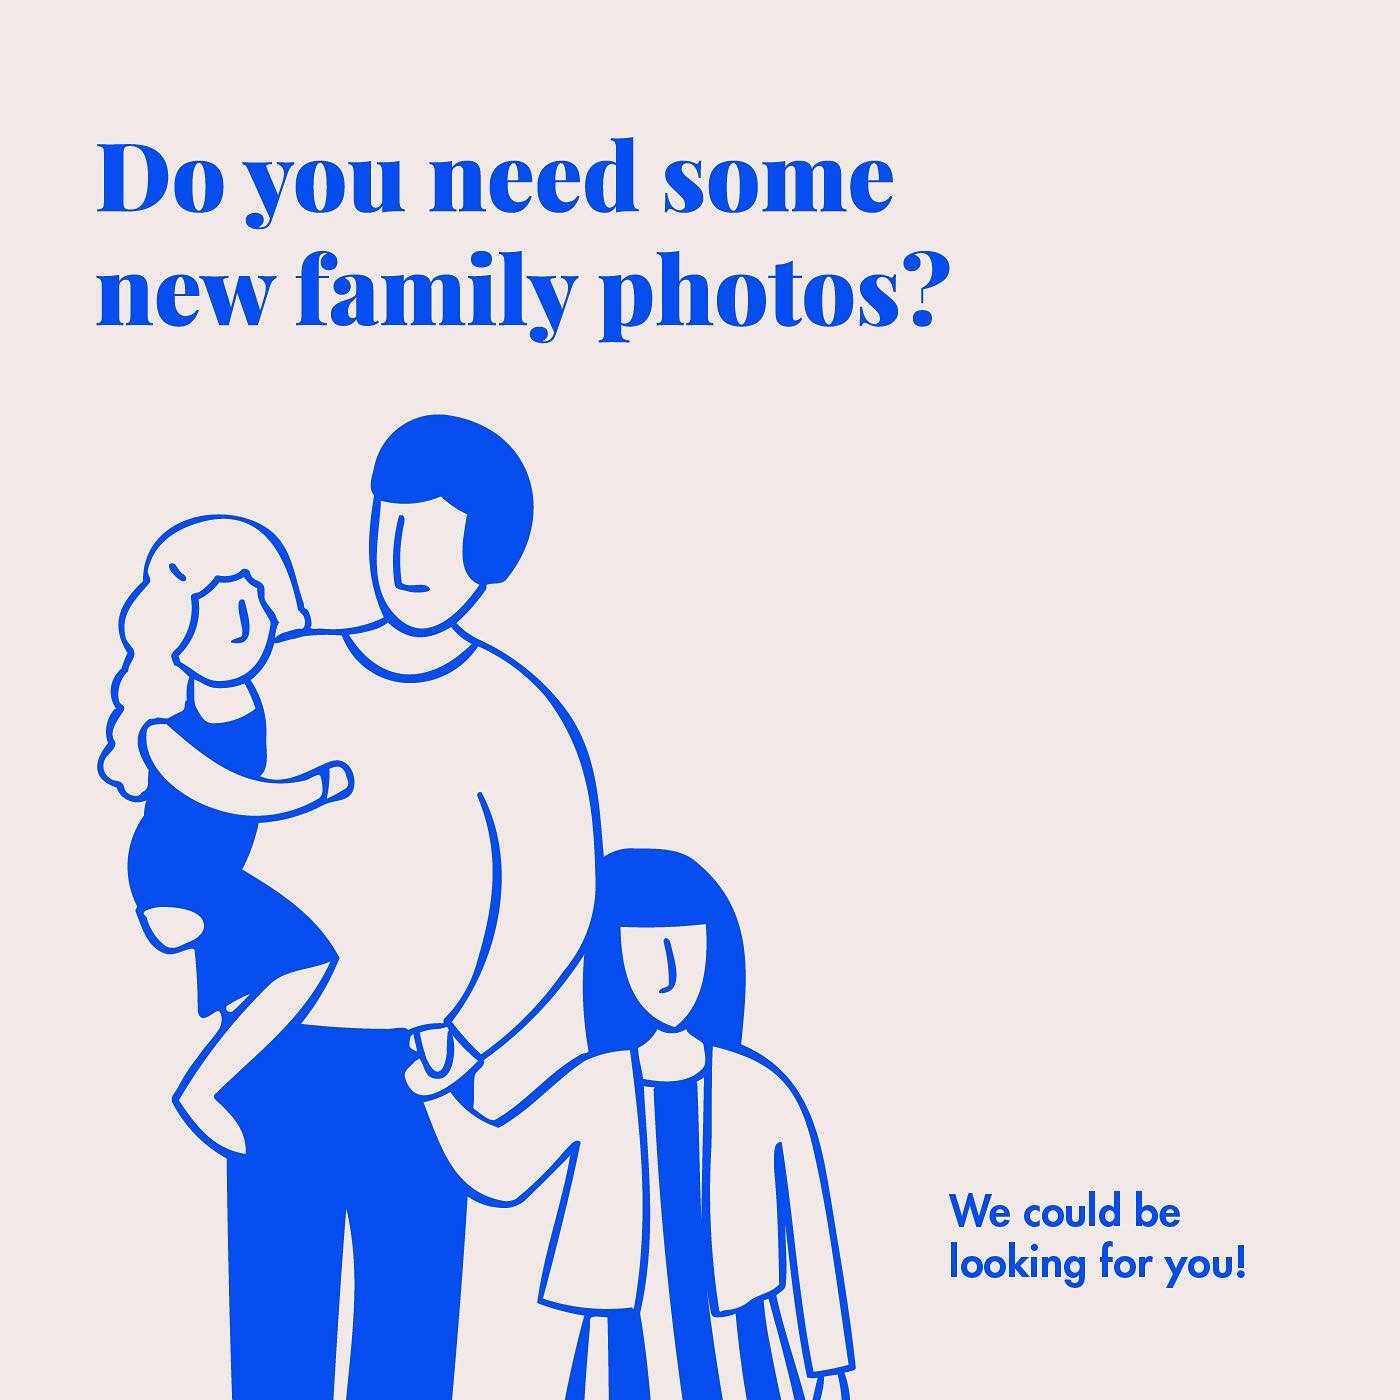 *Application closed. We&rsquo;re doing a photoshoot in the winelands and we need a beautiful family with young children to photograph.
Sound intruiging? Get in touch with us at carmen@grandcentralstation.co.za - we can discuss compensation and expect